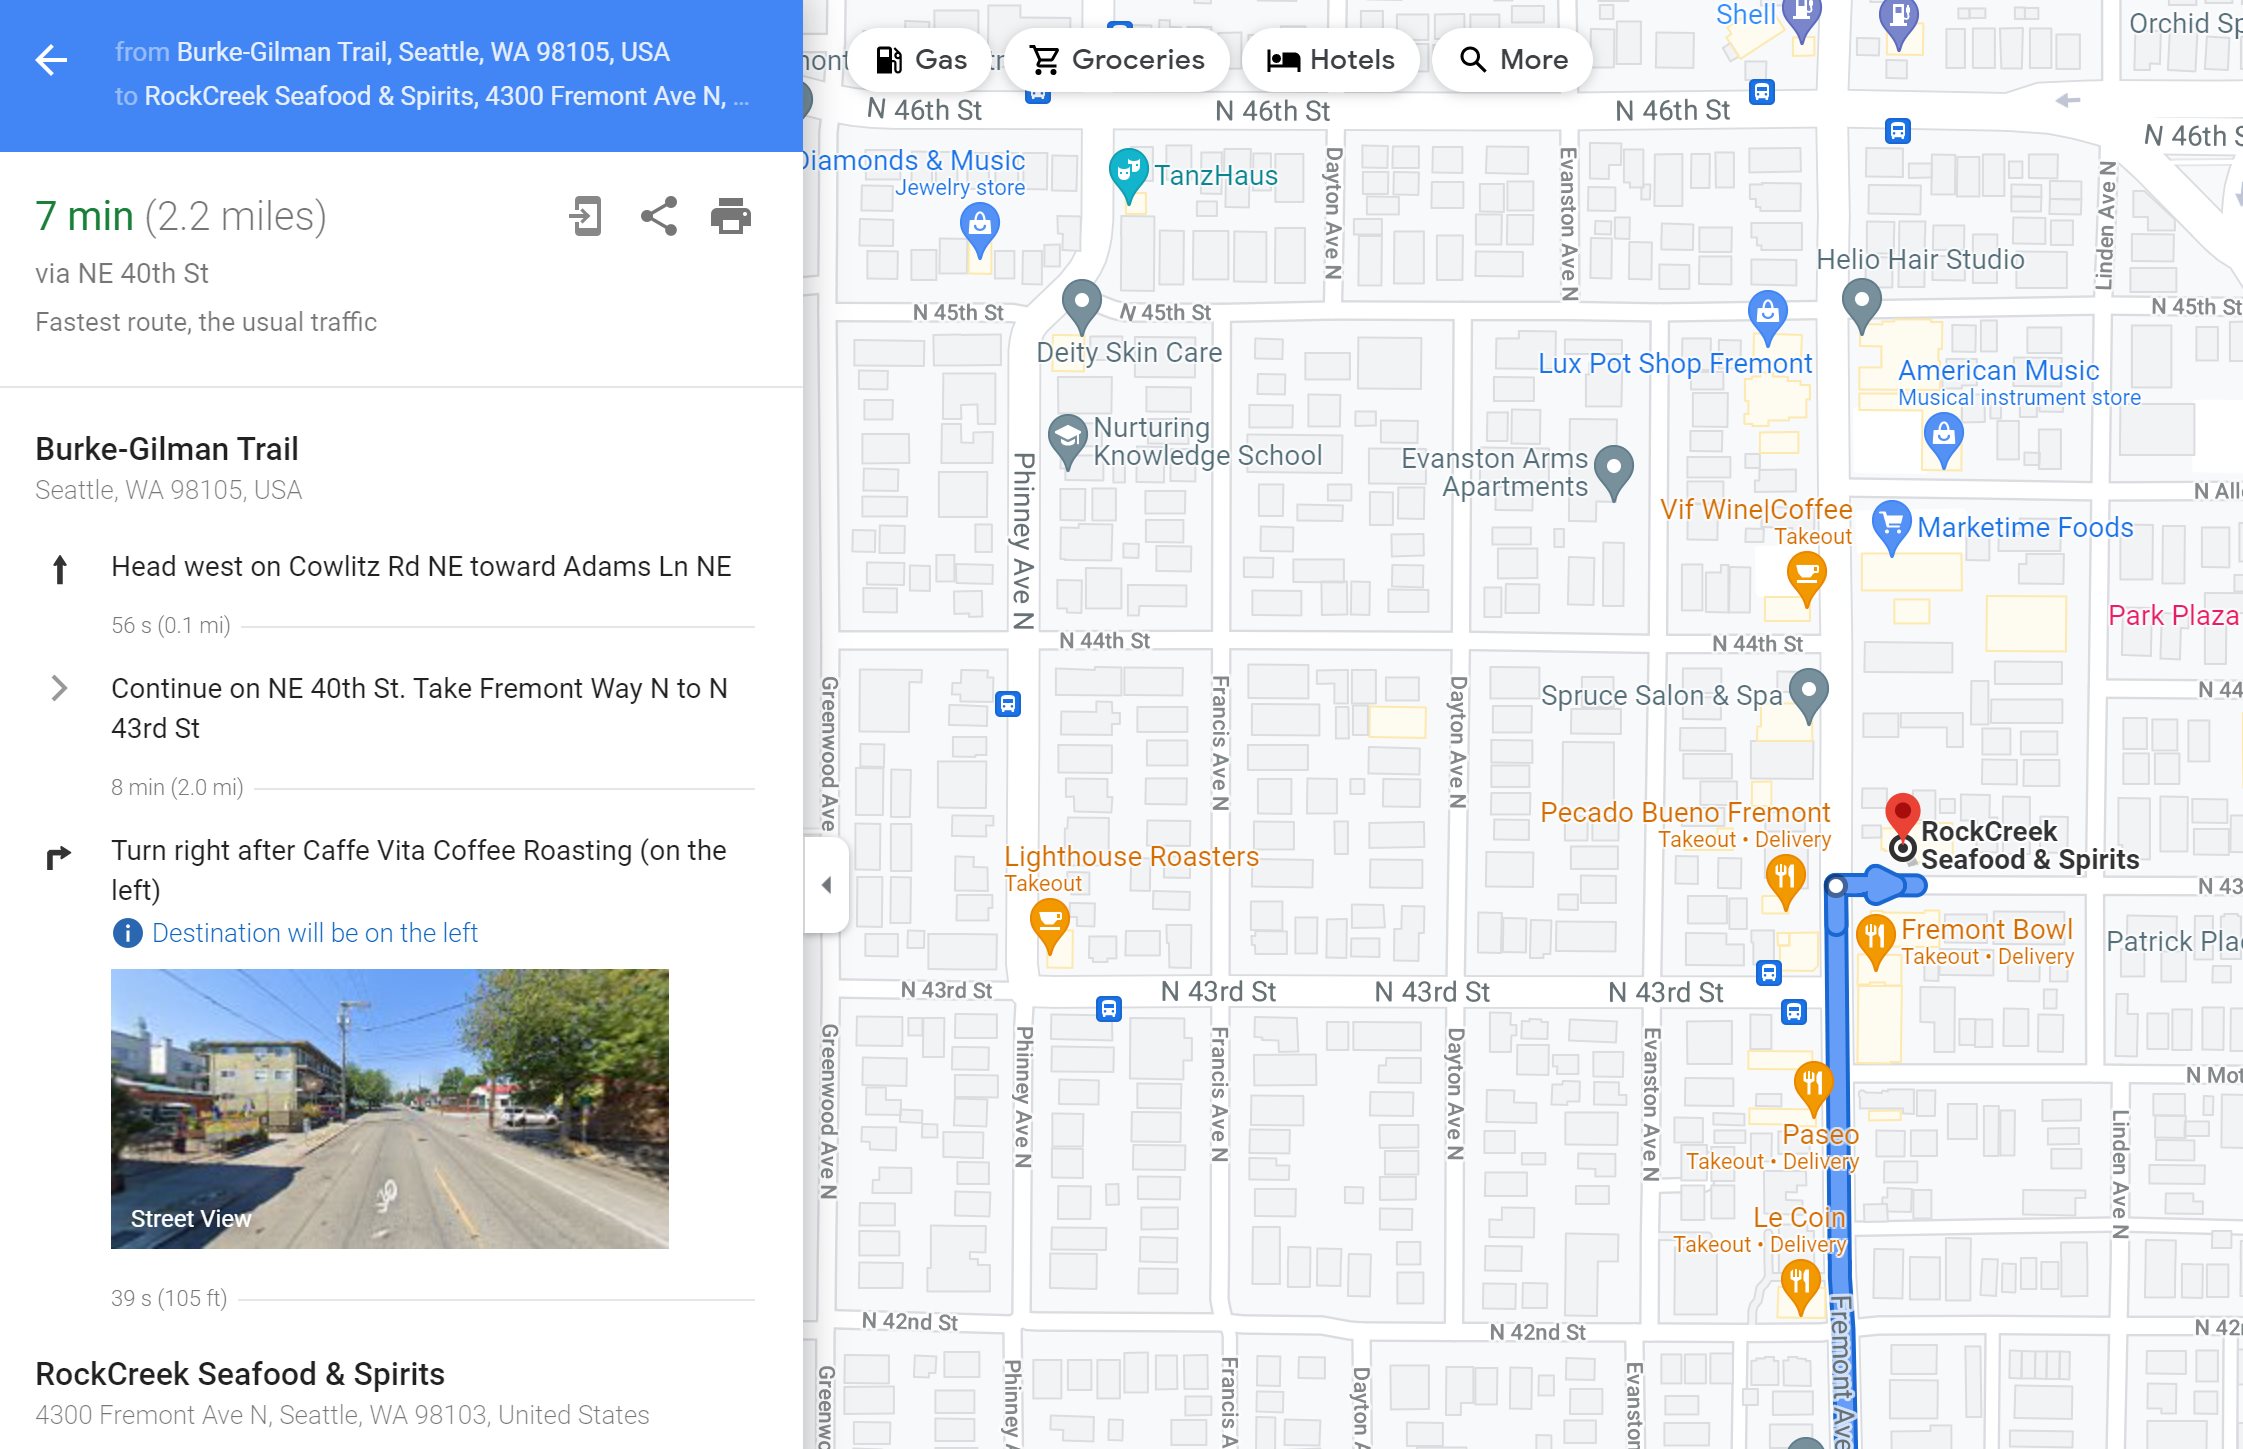 https://s1.cdn.autoevolution.com/images/news/gallery/google-announces-a-new-big-google-maps-feature-here-s-everything-you-need-to-know_4.jpg